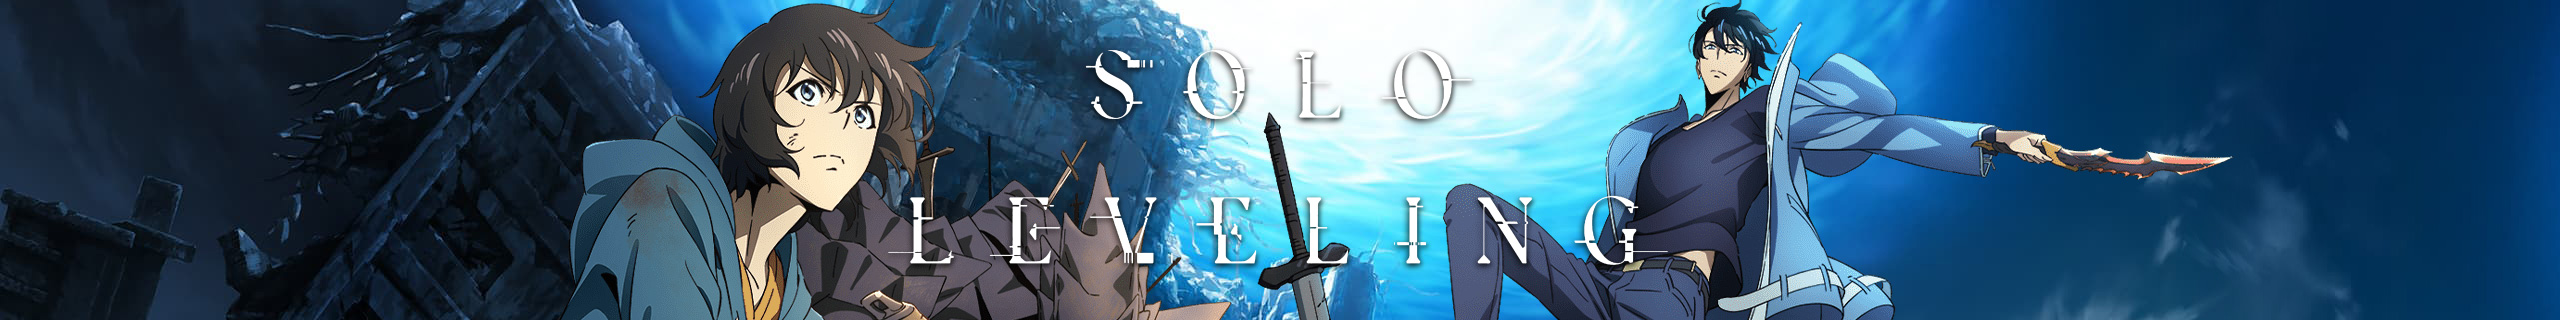 Solo Leveling Banner